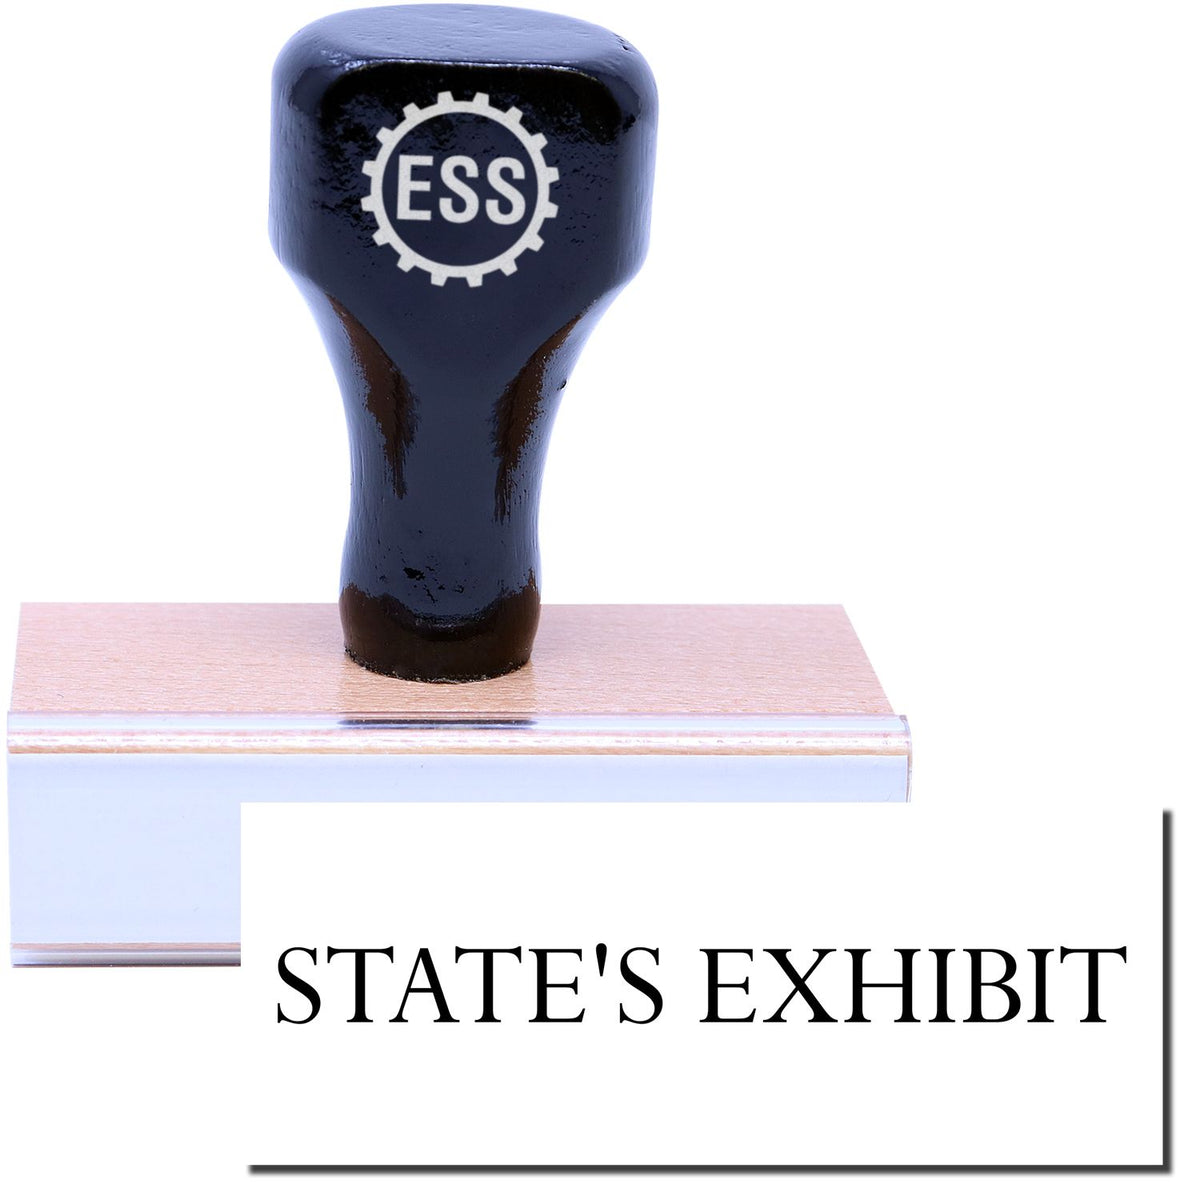 A stock office rubber stamp with a stamped image showing how the text &quot;STATE&#39;S EXHIBIT&quot; in a large font is displayed after stamping.